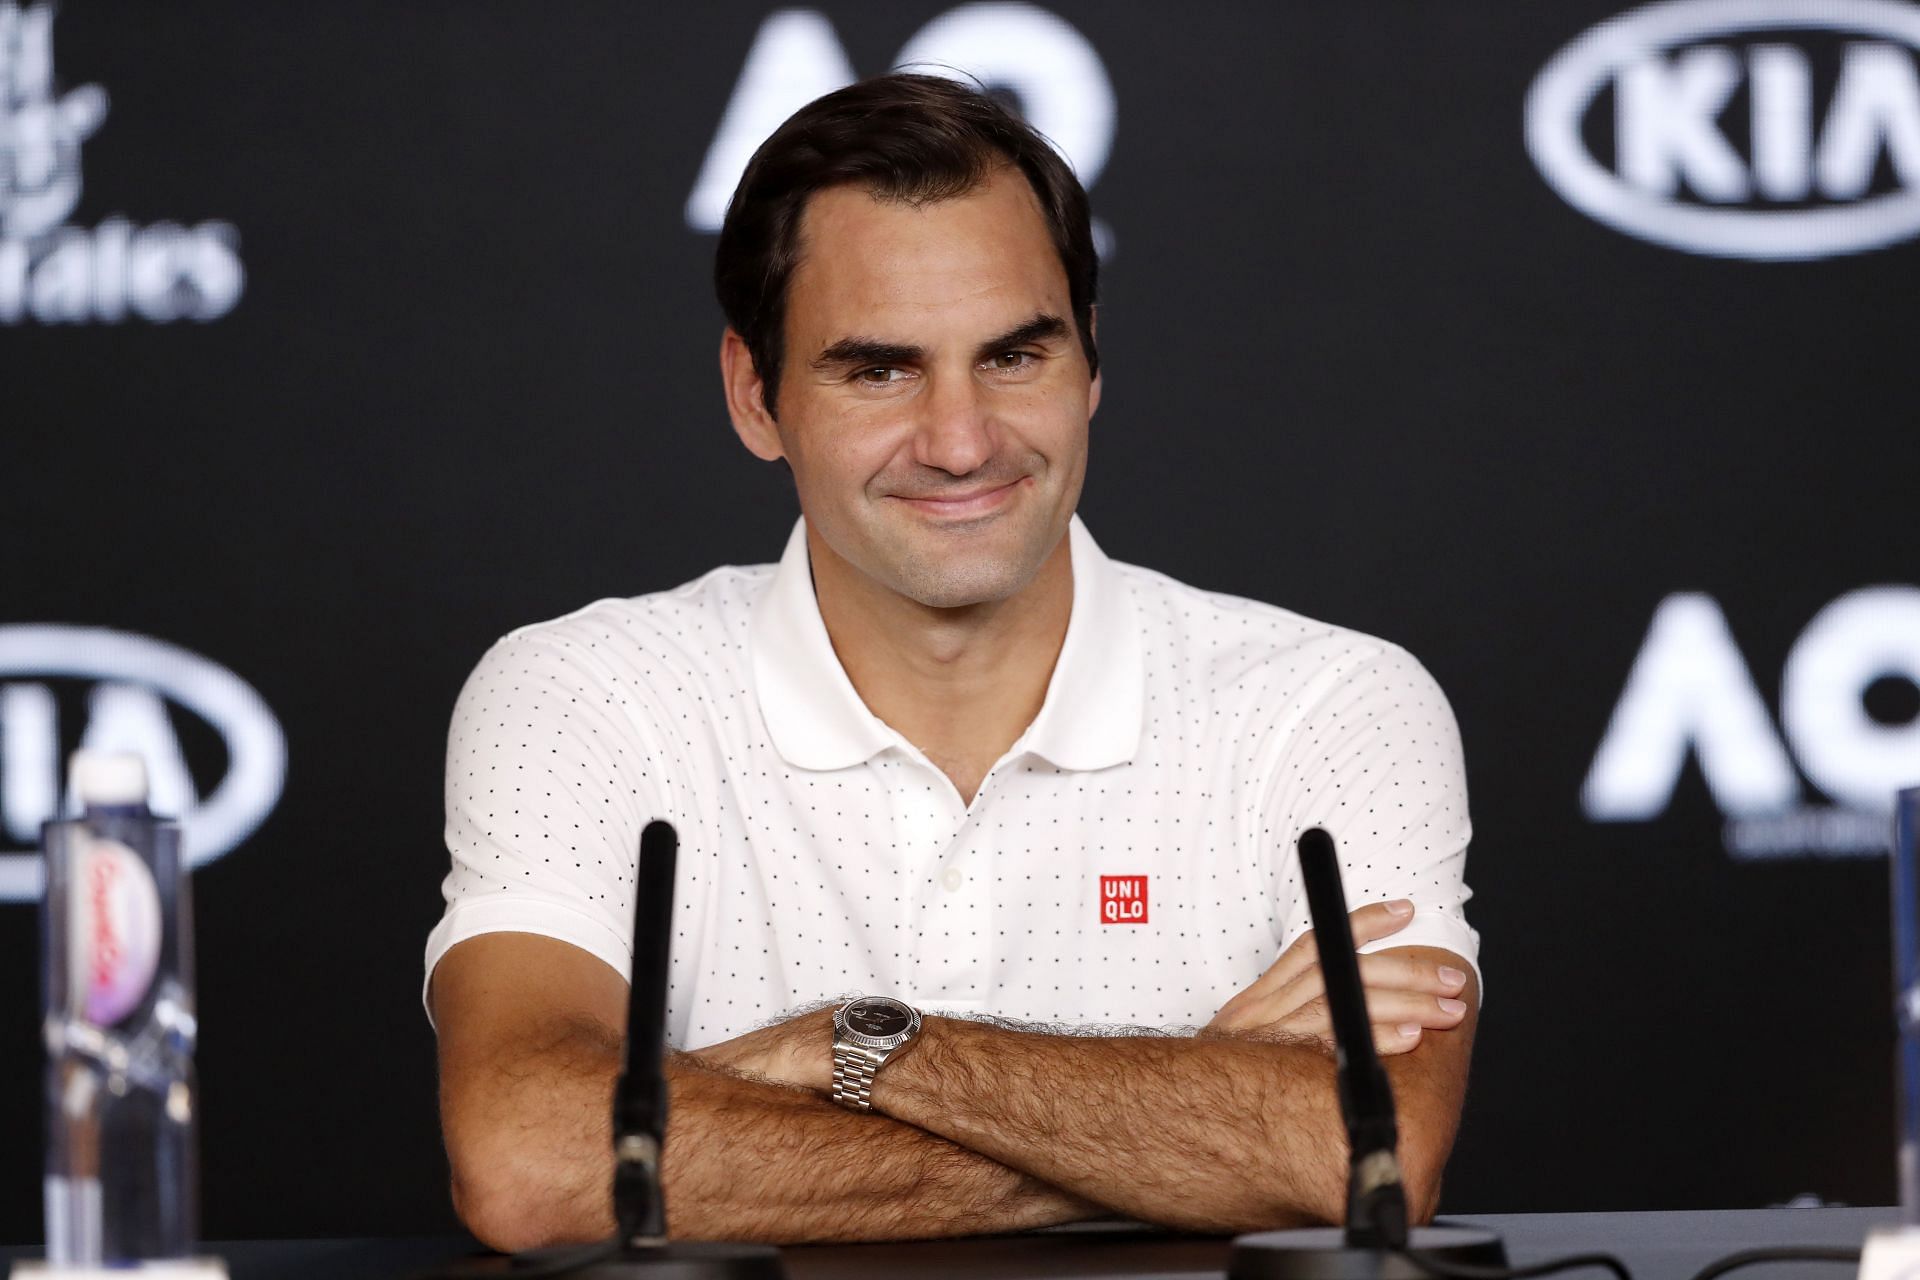 Roger Federer interacts with the media at the 2020 Australian Open